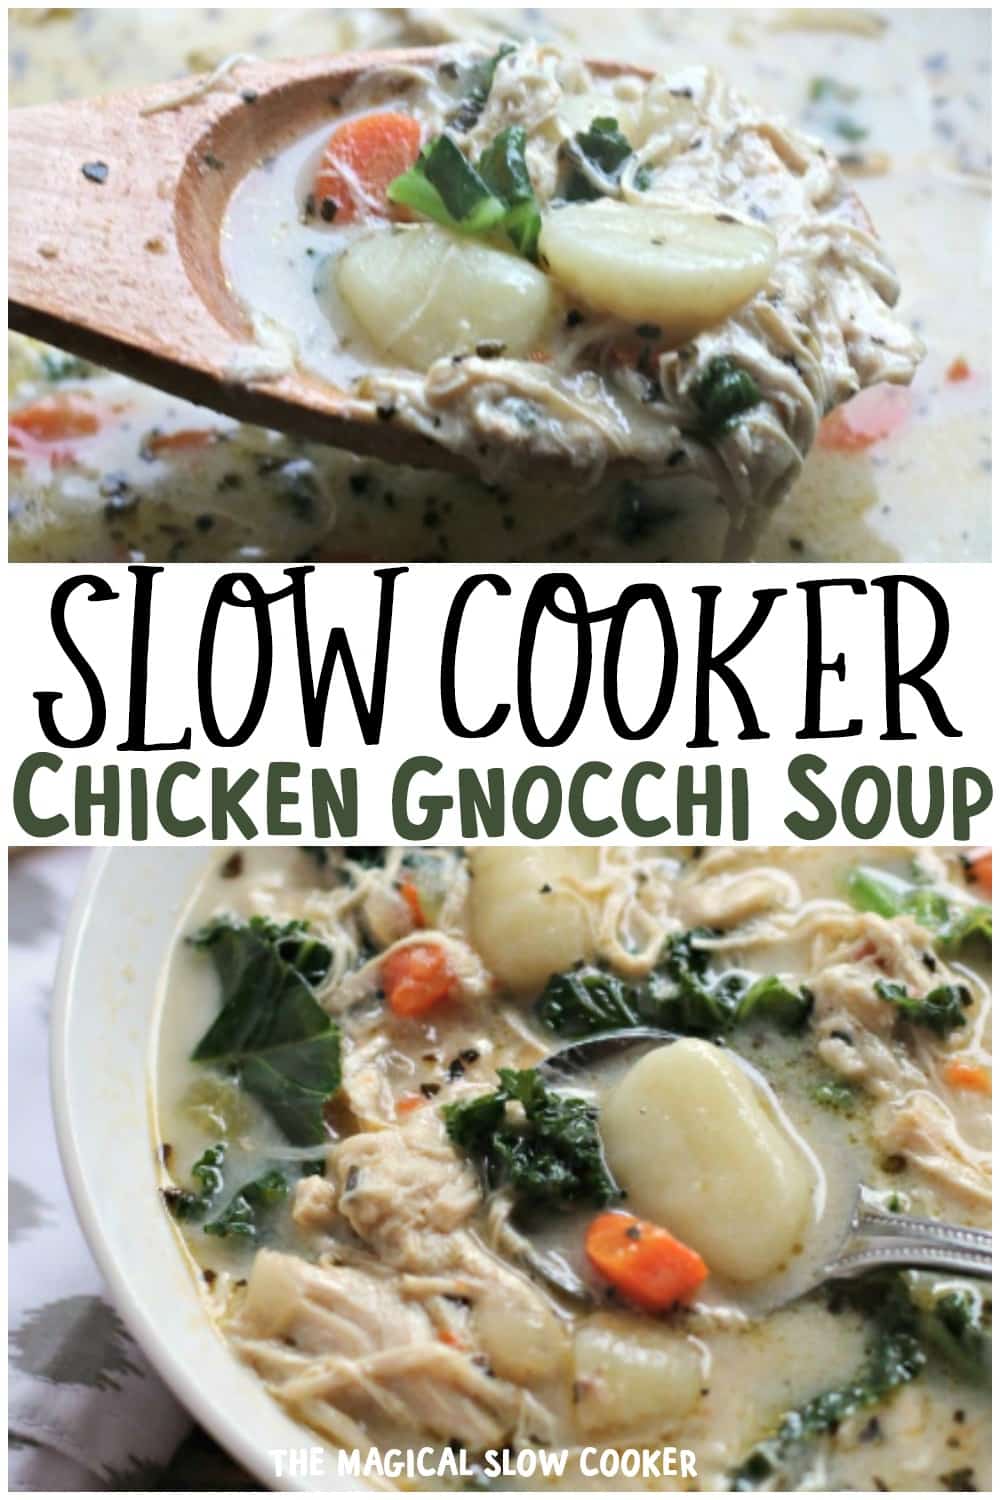 Slow Cooker Chicken and Kale Gnocchi Soup - The Magical Slow Cooker